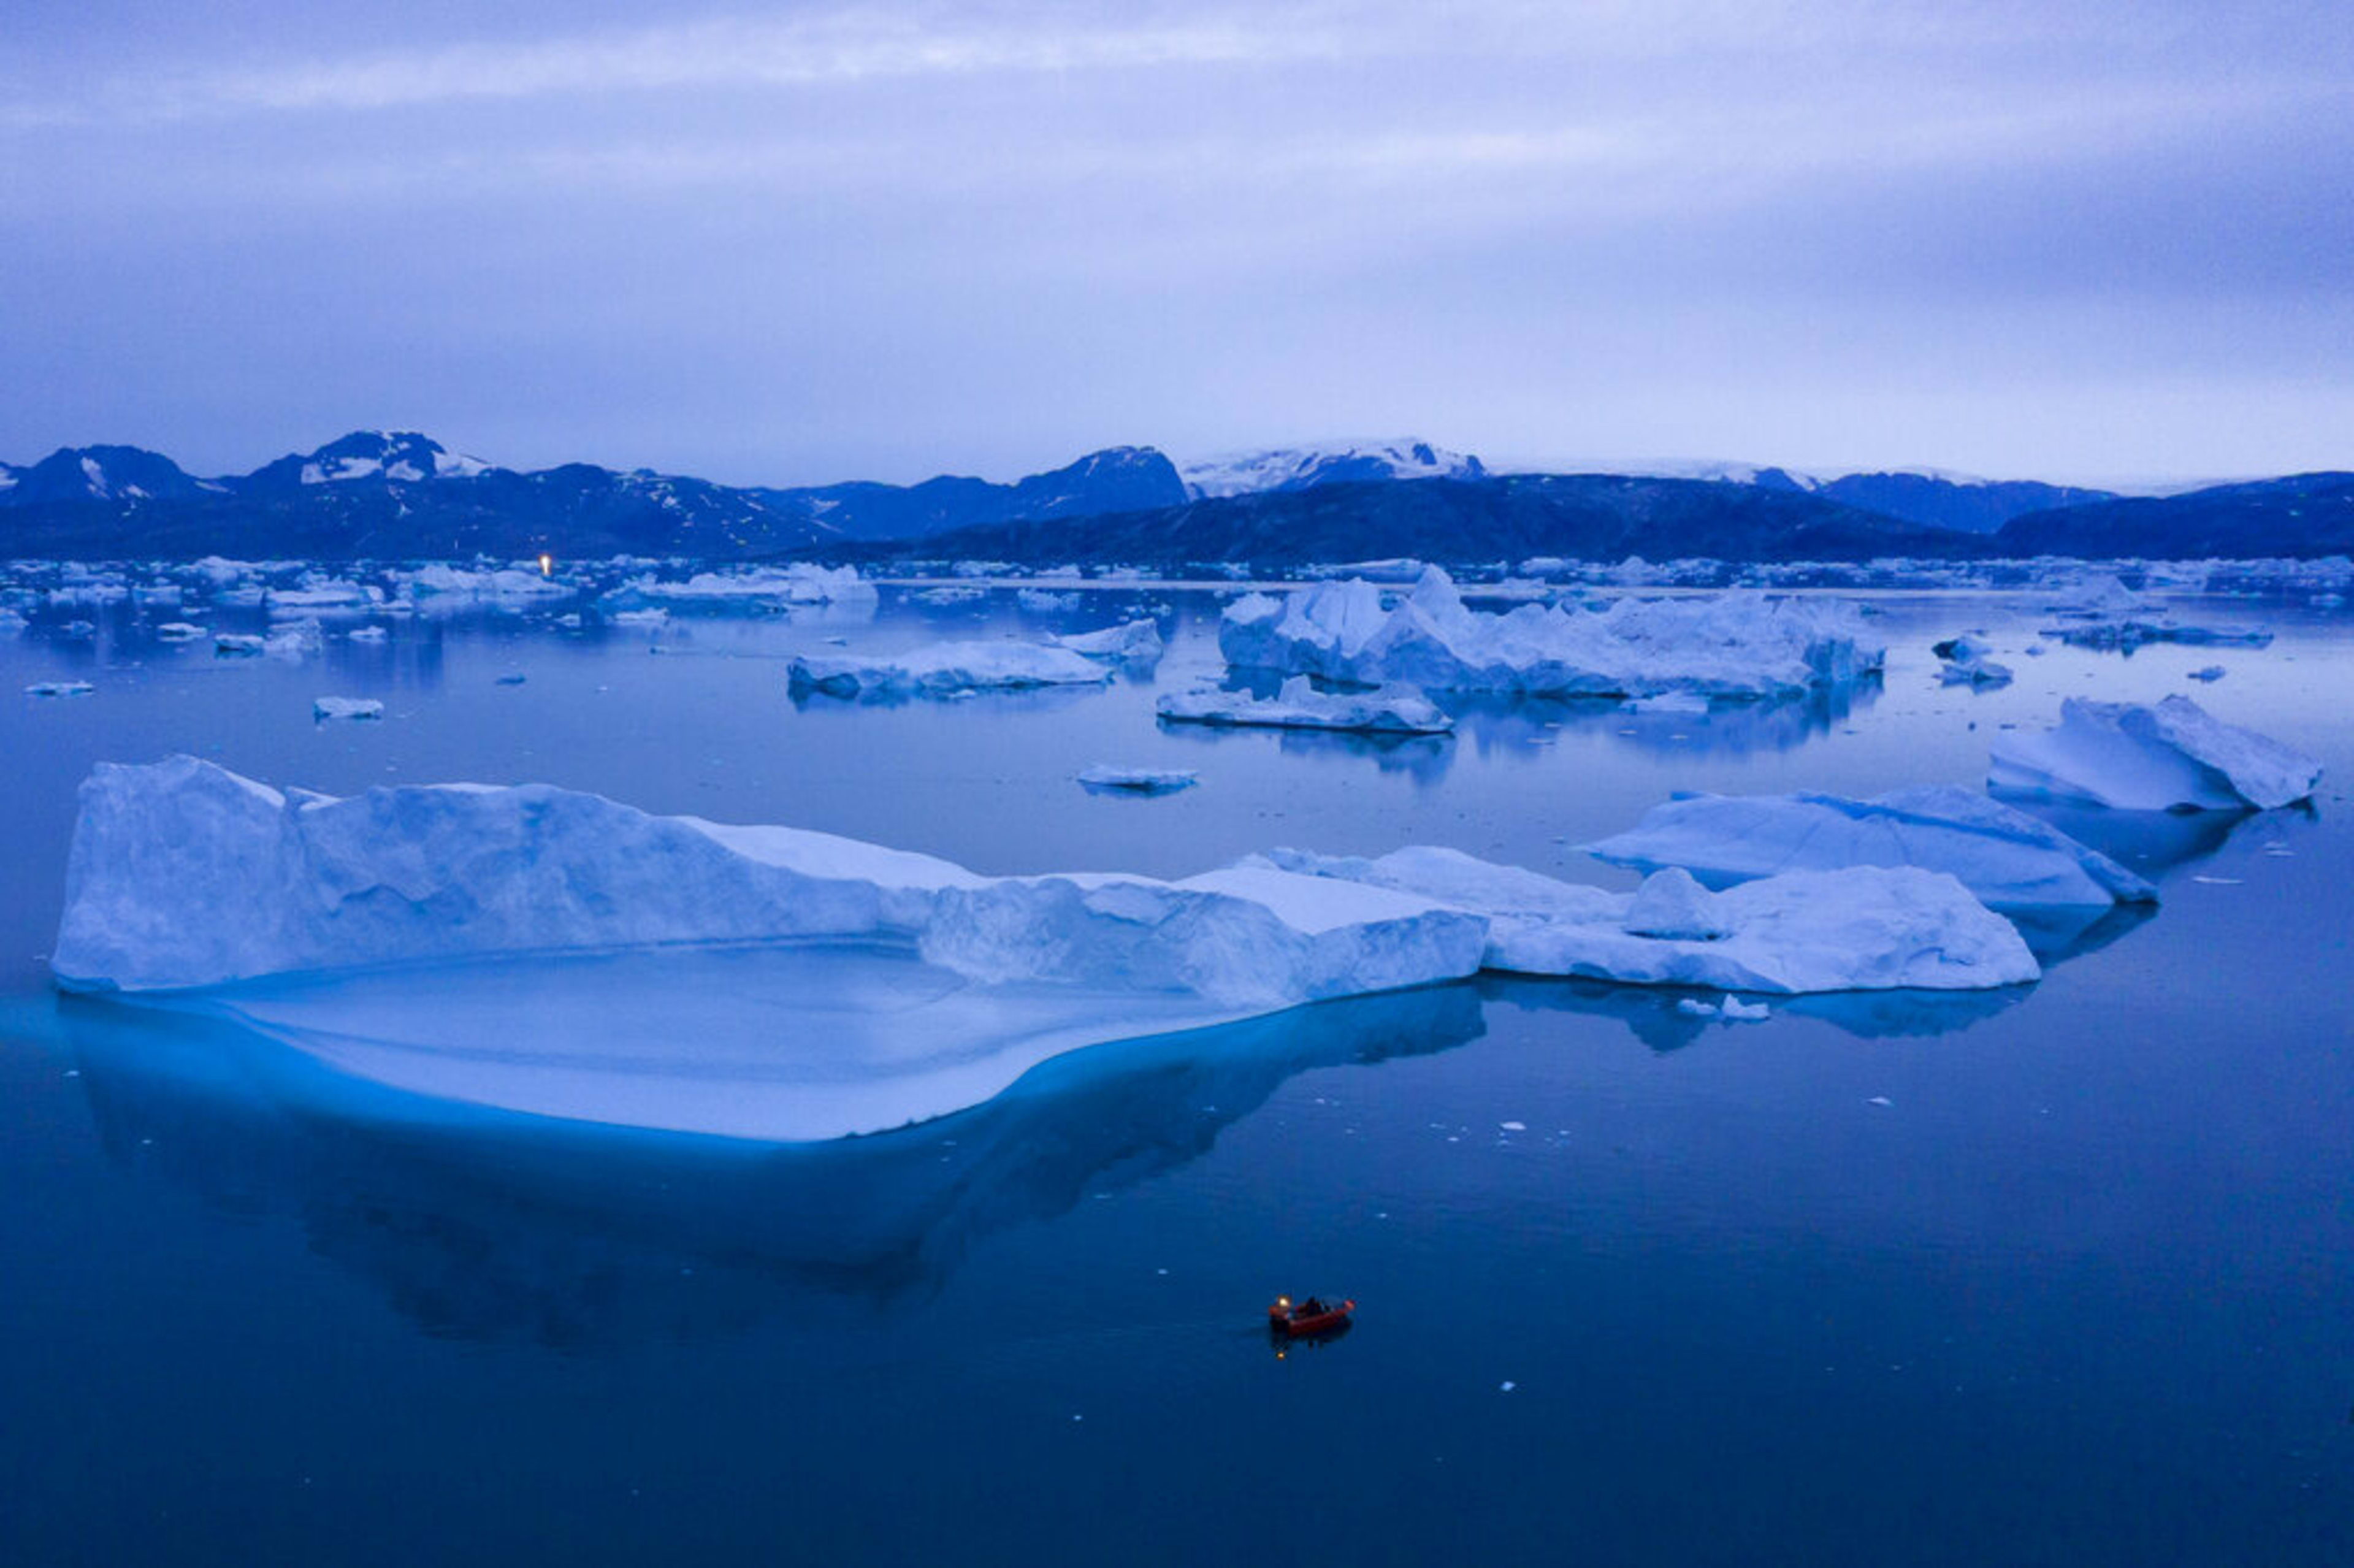 Greenland is the hottest it’s been in 1,000 years, says an alarming new study of ice cores